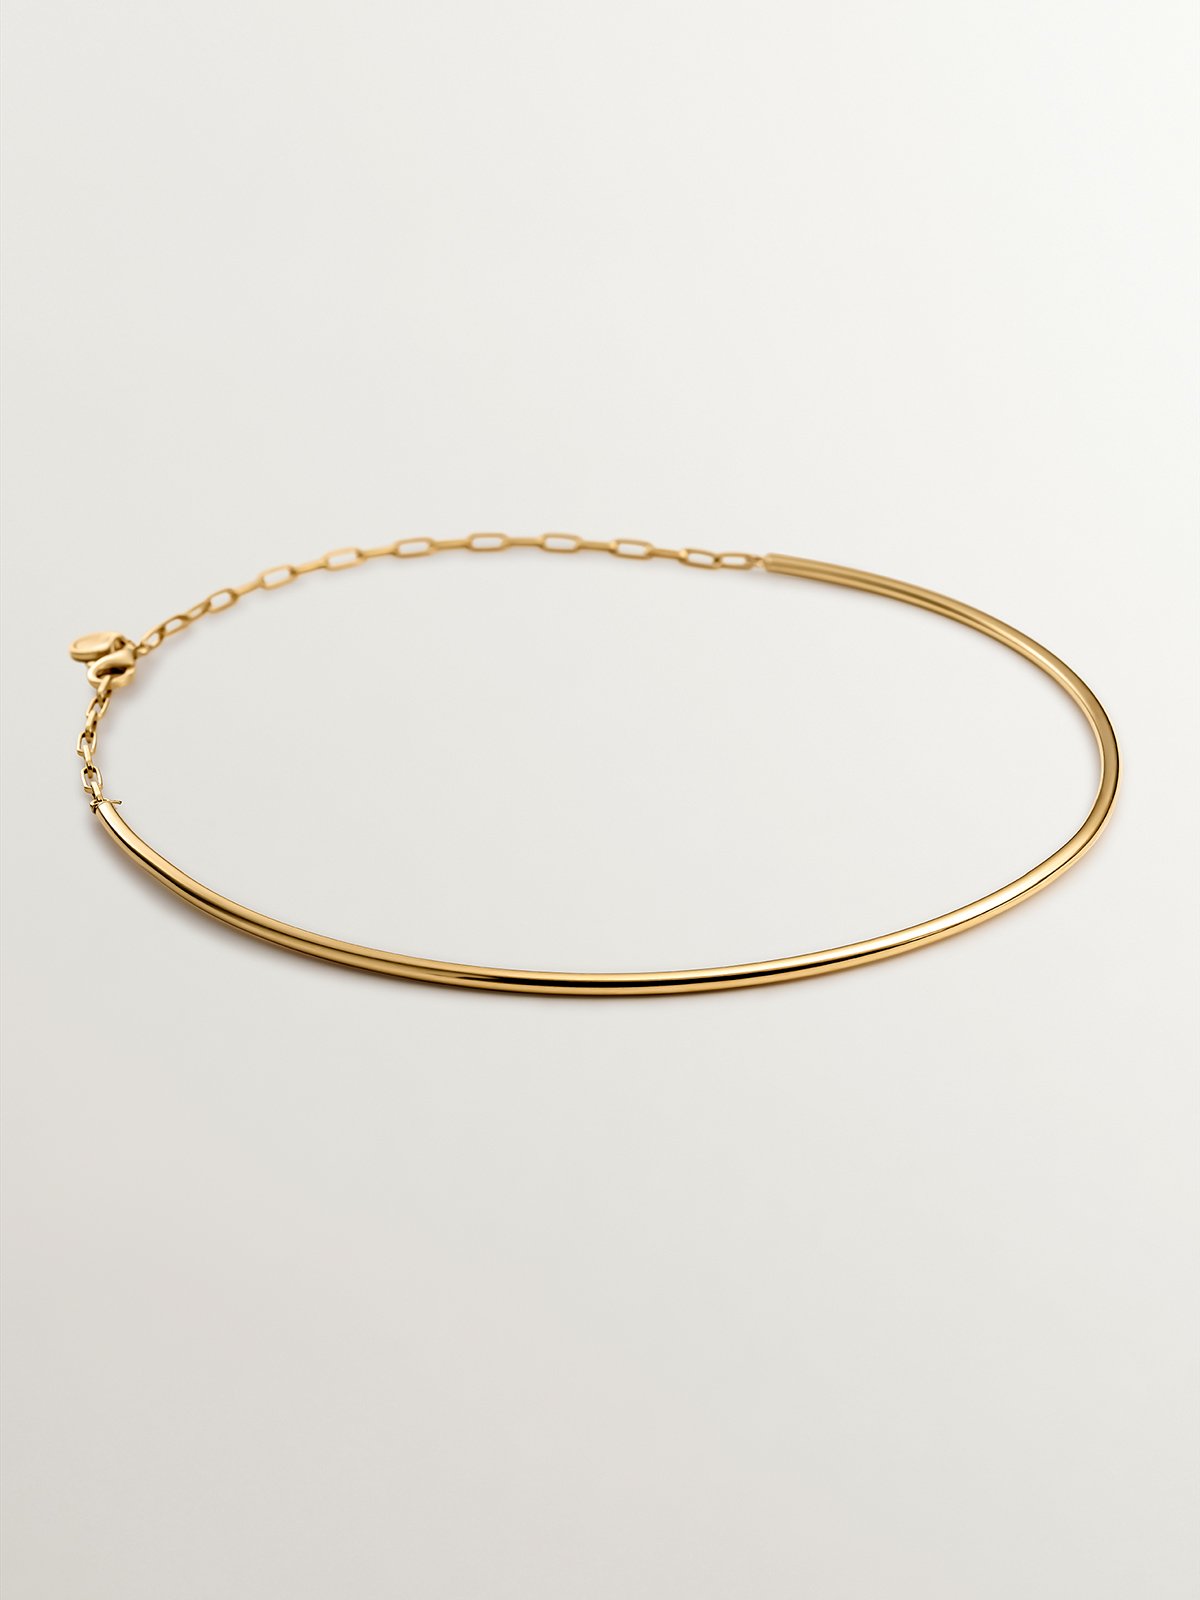 Rigid necklace made of 925 sterling silver coated in 18K yellow gold.